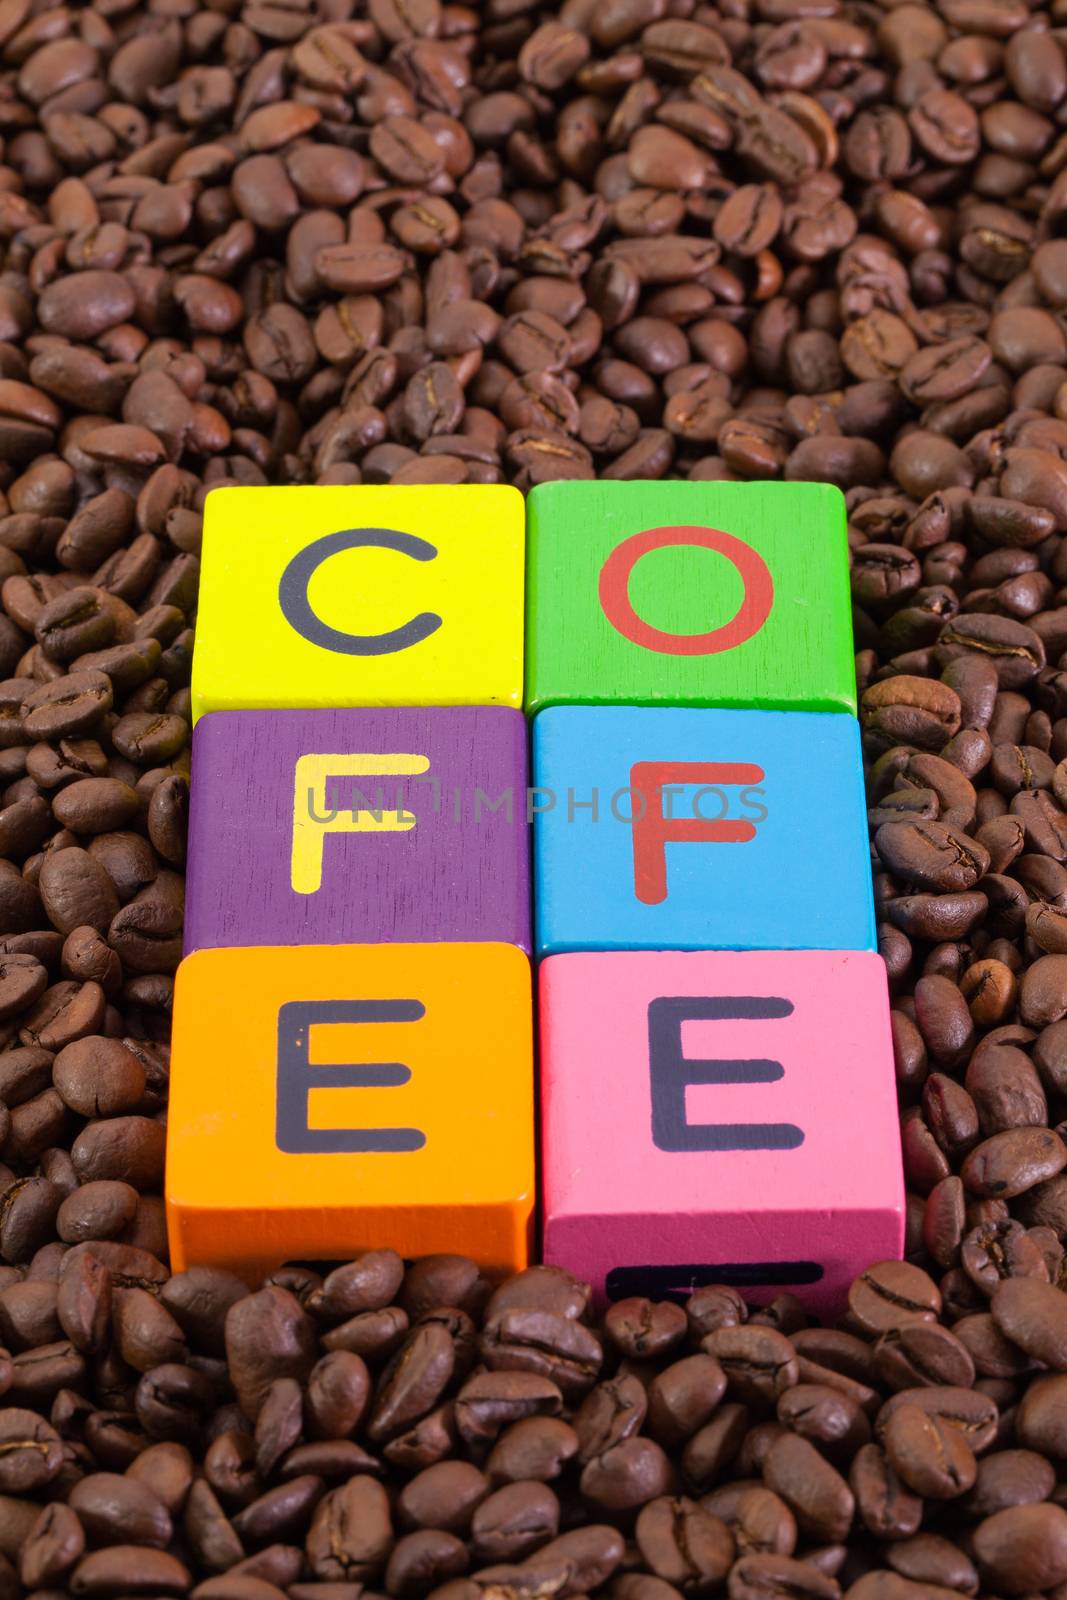 Colored children's cubes and coffee beans